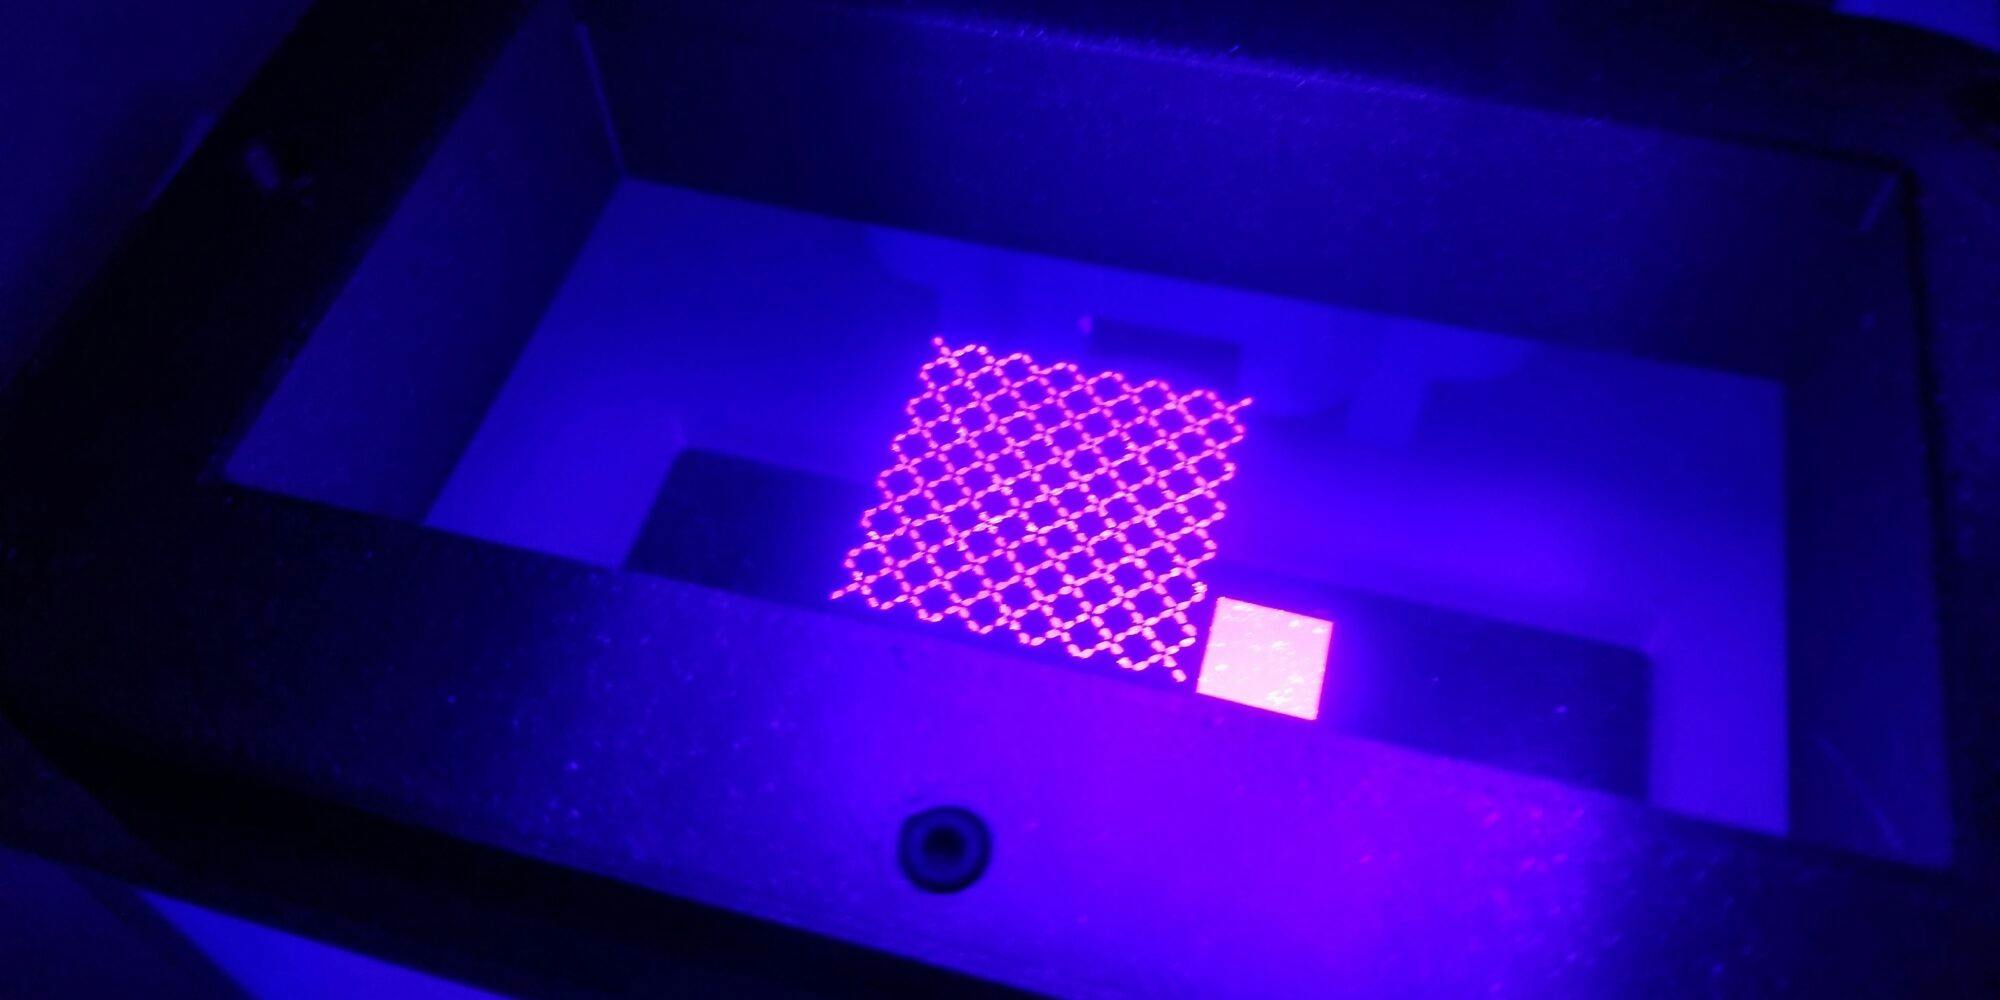 Researchers at the Kaplan Lab have developed a proof-of-concept DLP bioprinter based on In-Vision UV DLP projector, Ikarus.